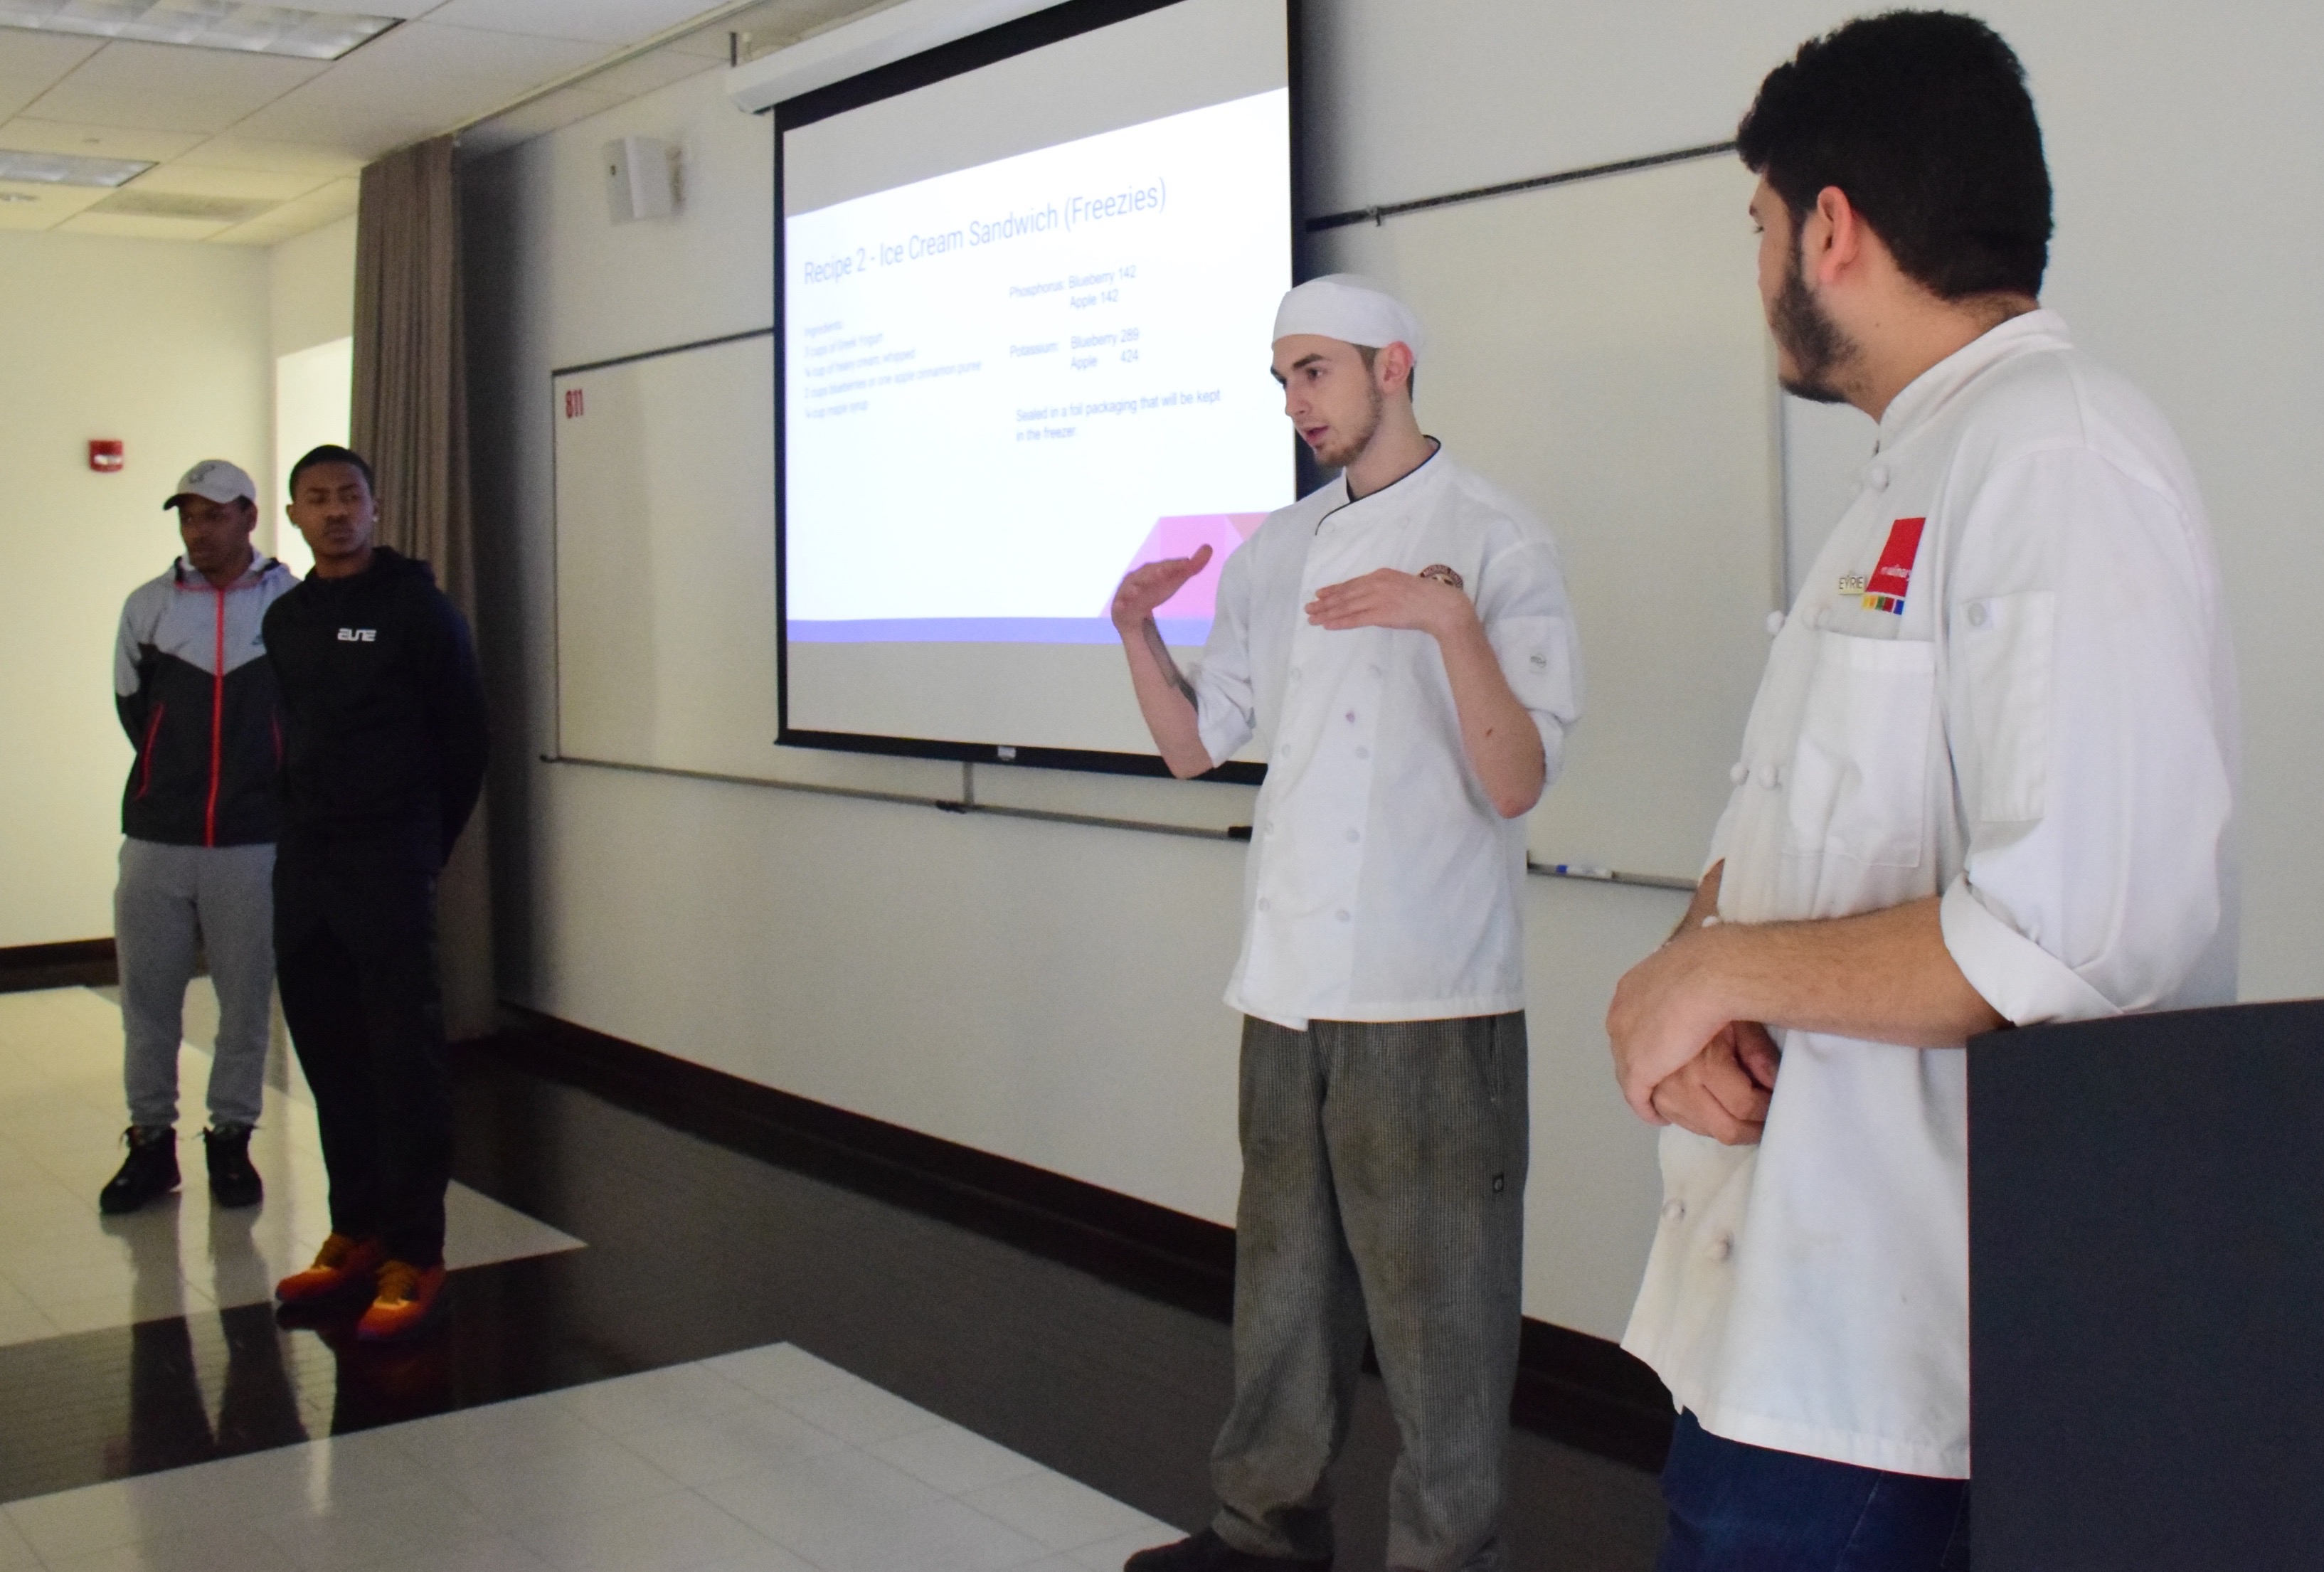 RMU students explain the nutritional values for each dish presented during the tasting.